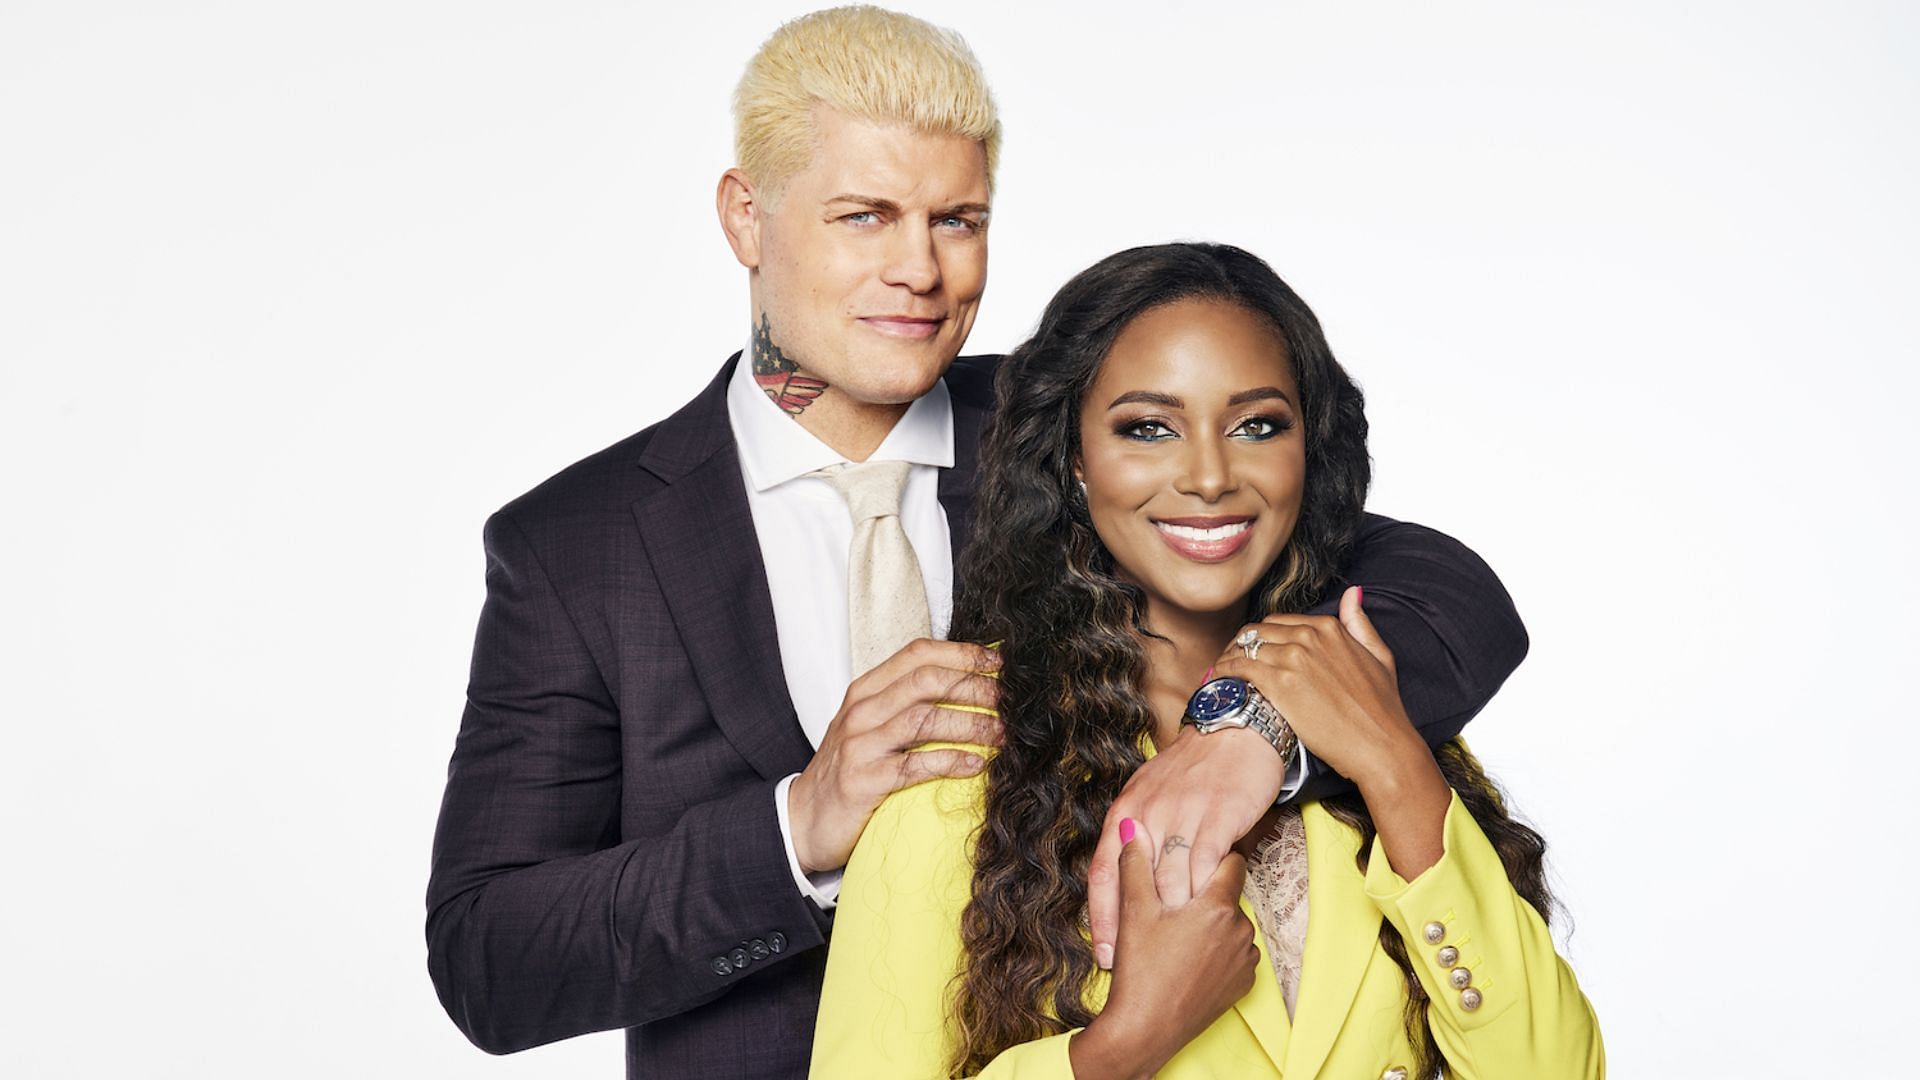 Which star did Cody and Brandi Rhodes introduce to her future husband?